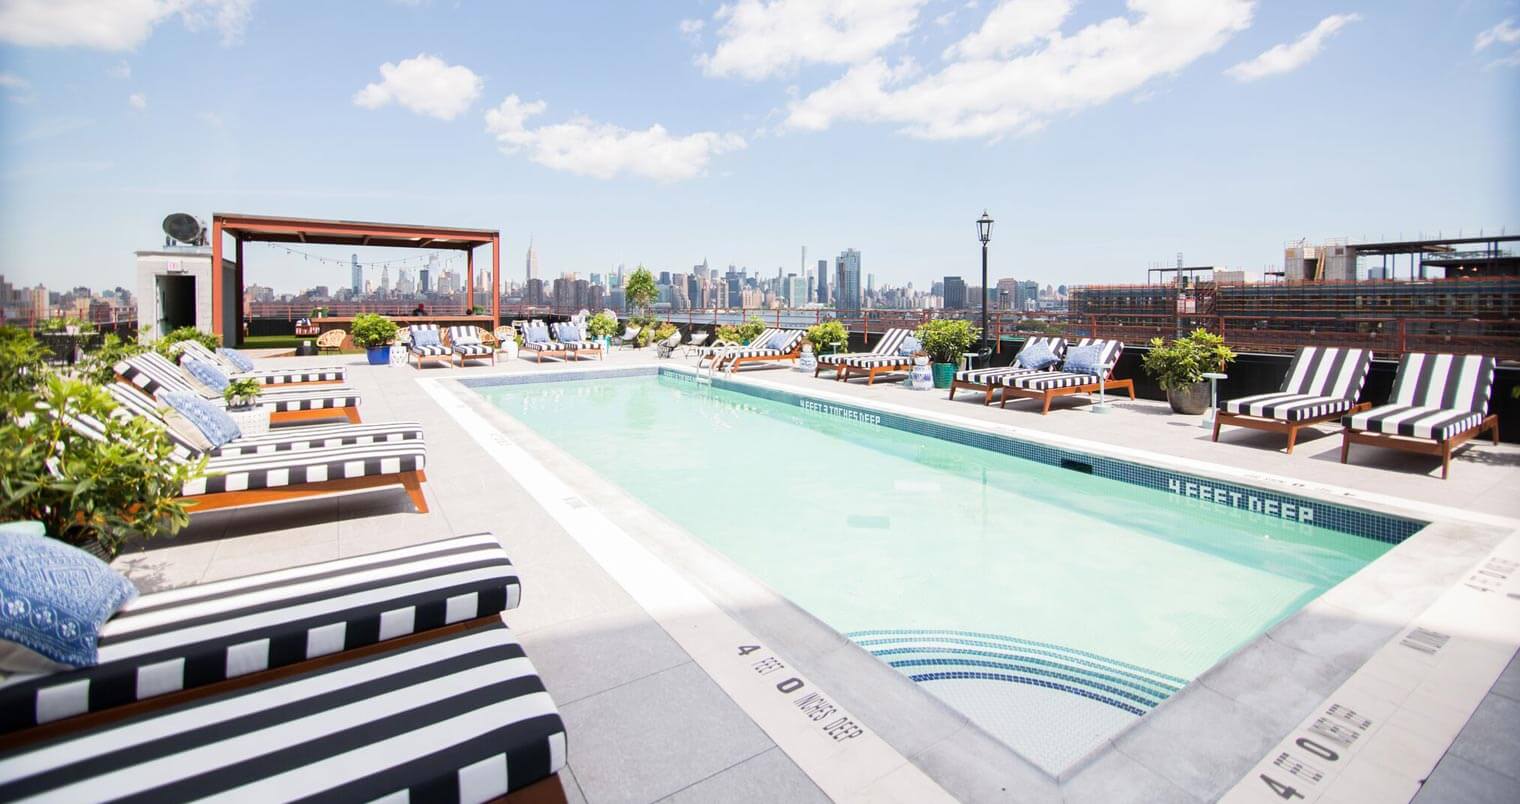 The Williamsburg Hotel pool with a view, featured image